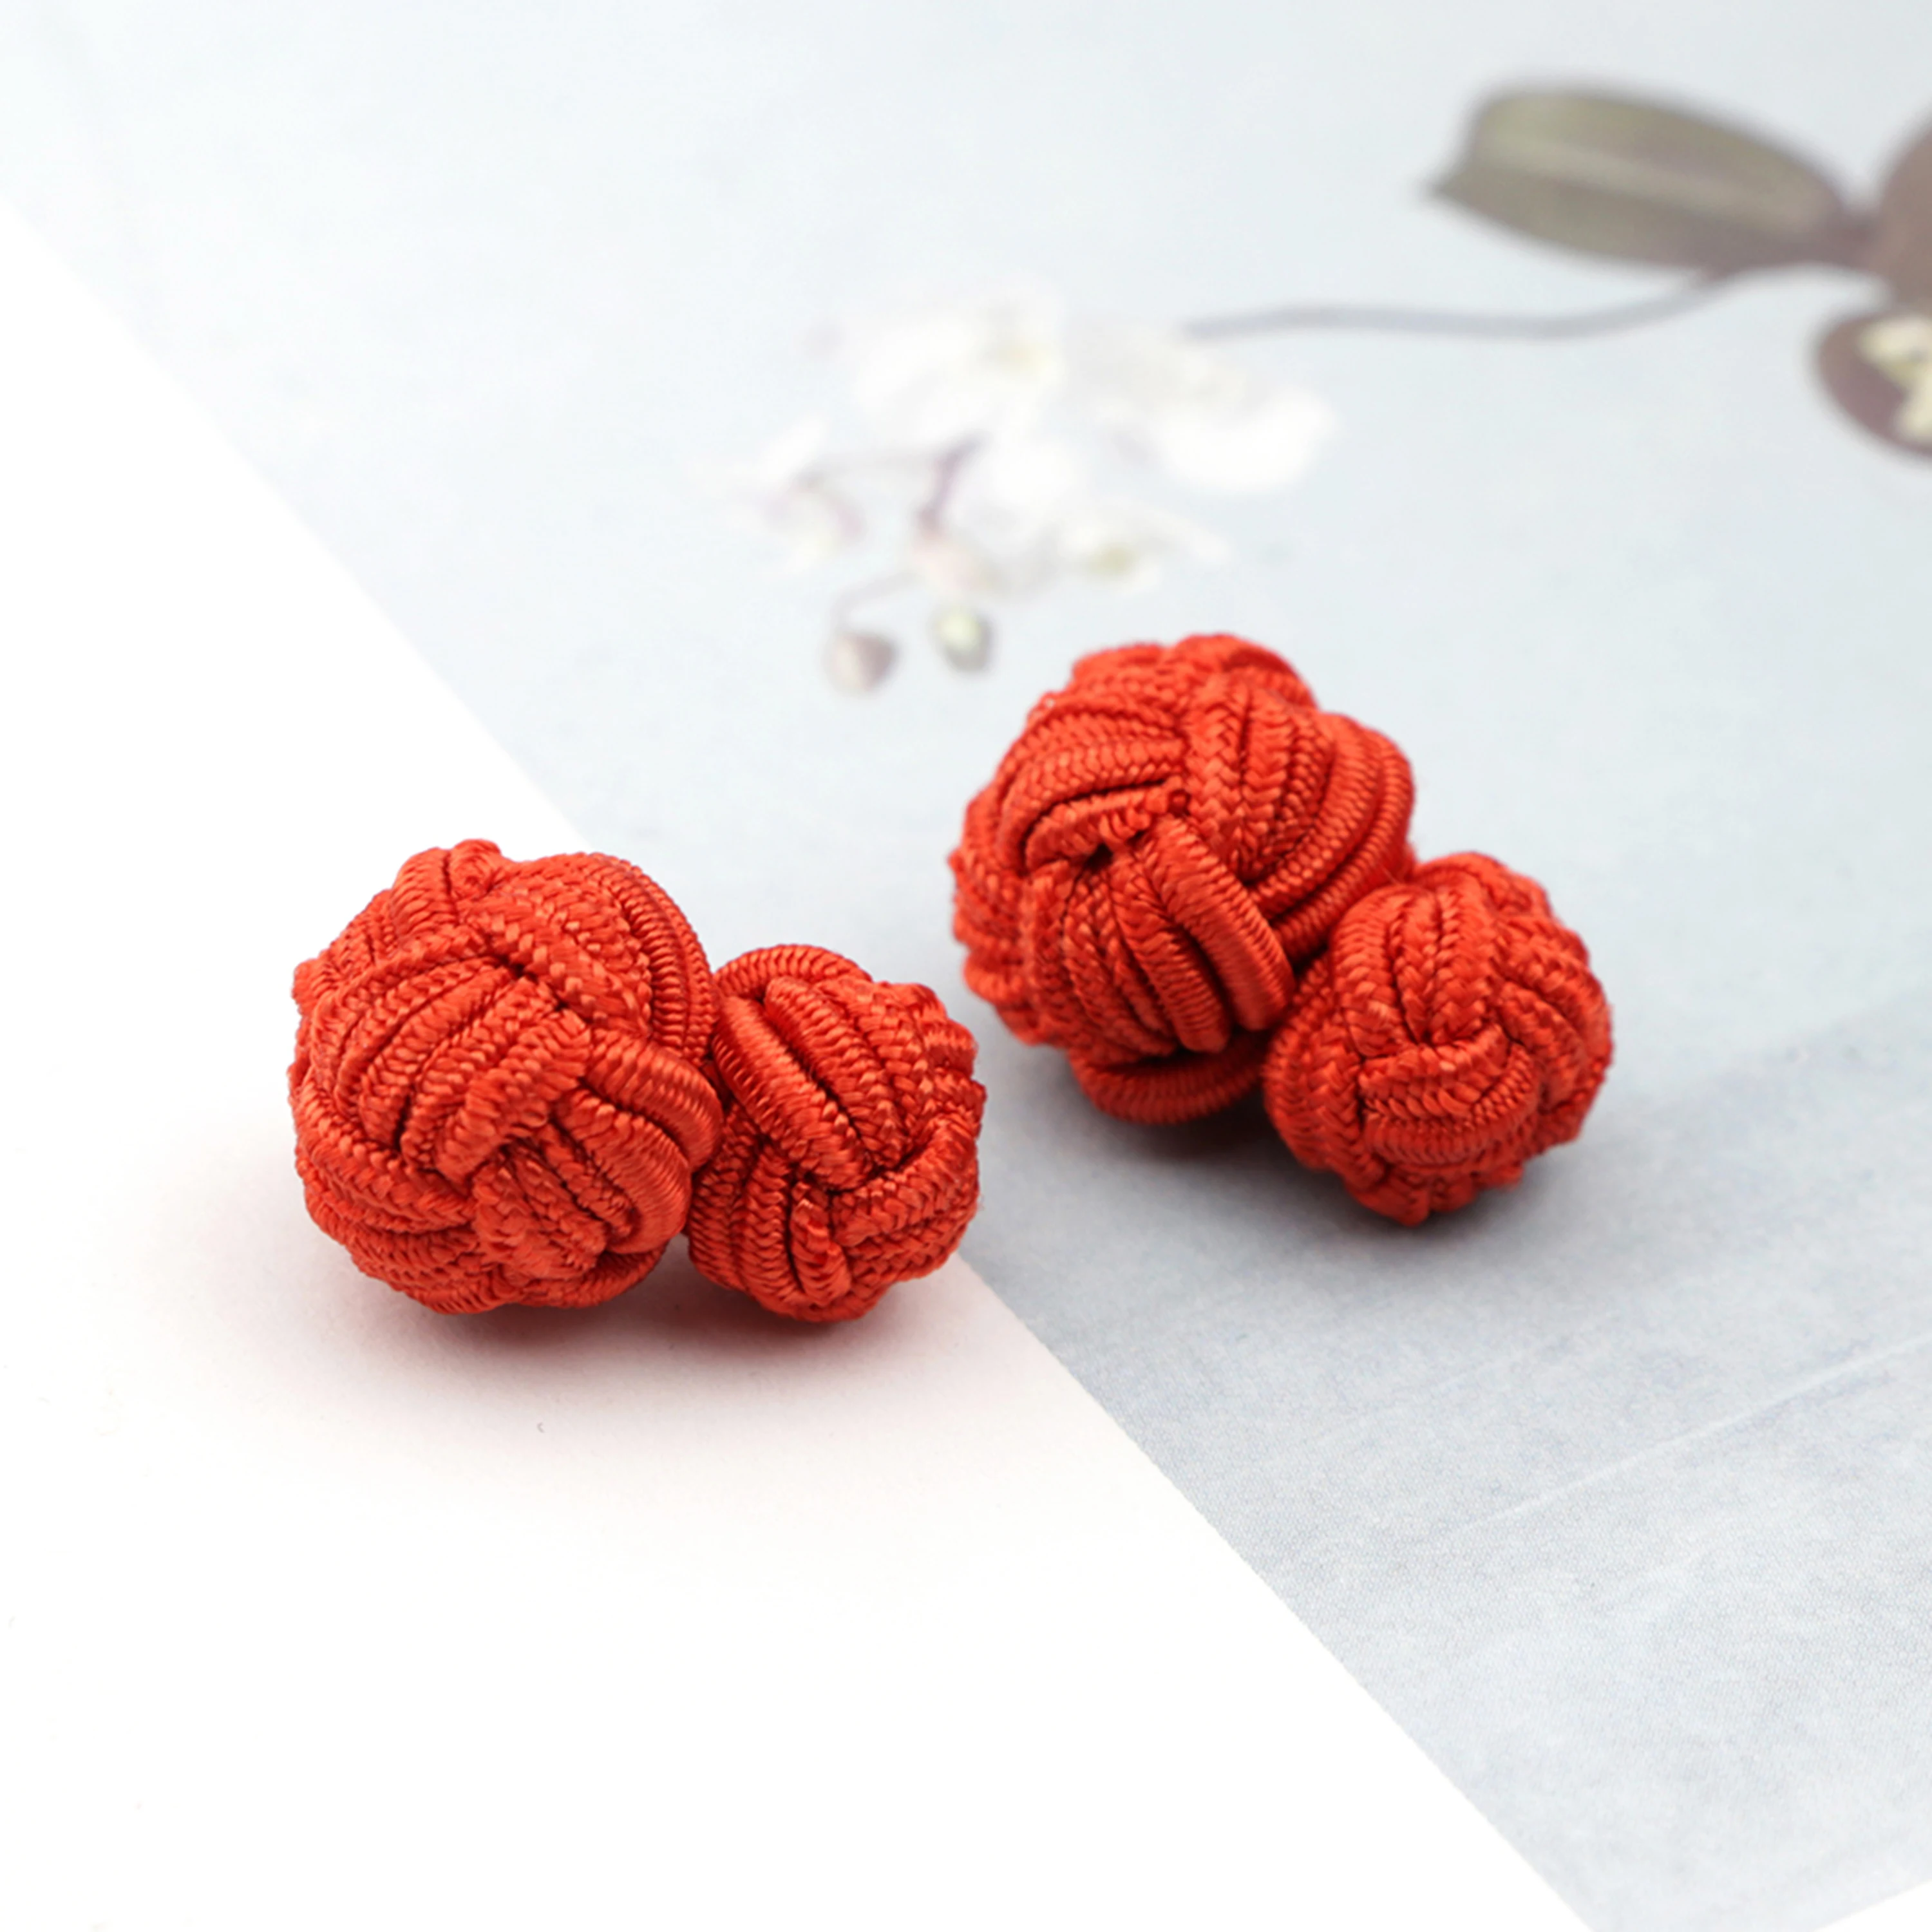 Colorful Double Rope Ball Knot Cufflinks Novelty Solid Colors Braided Handmade Elastic Upscale Men's Classic Cuff Links For Men